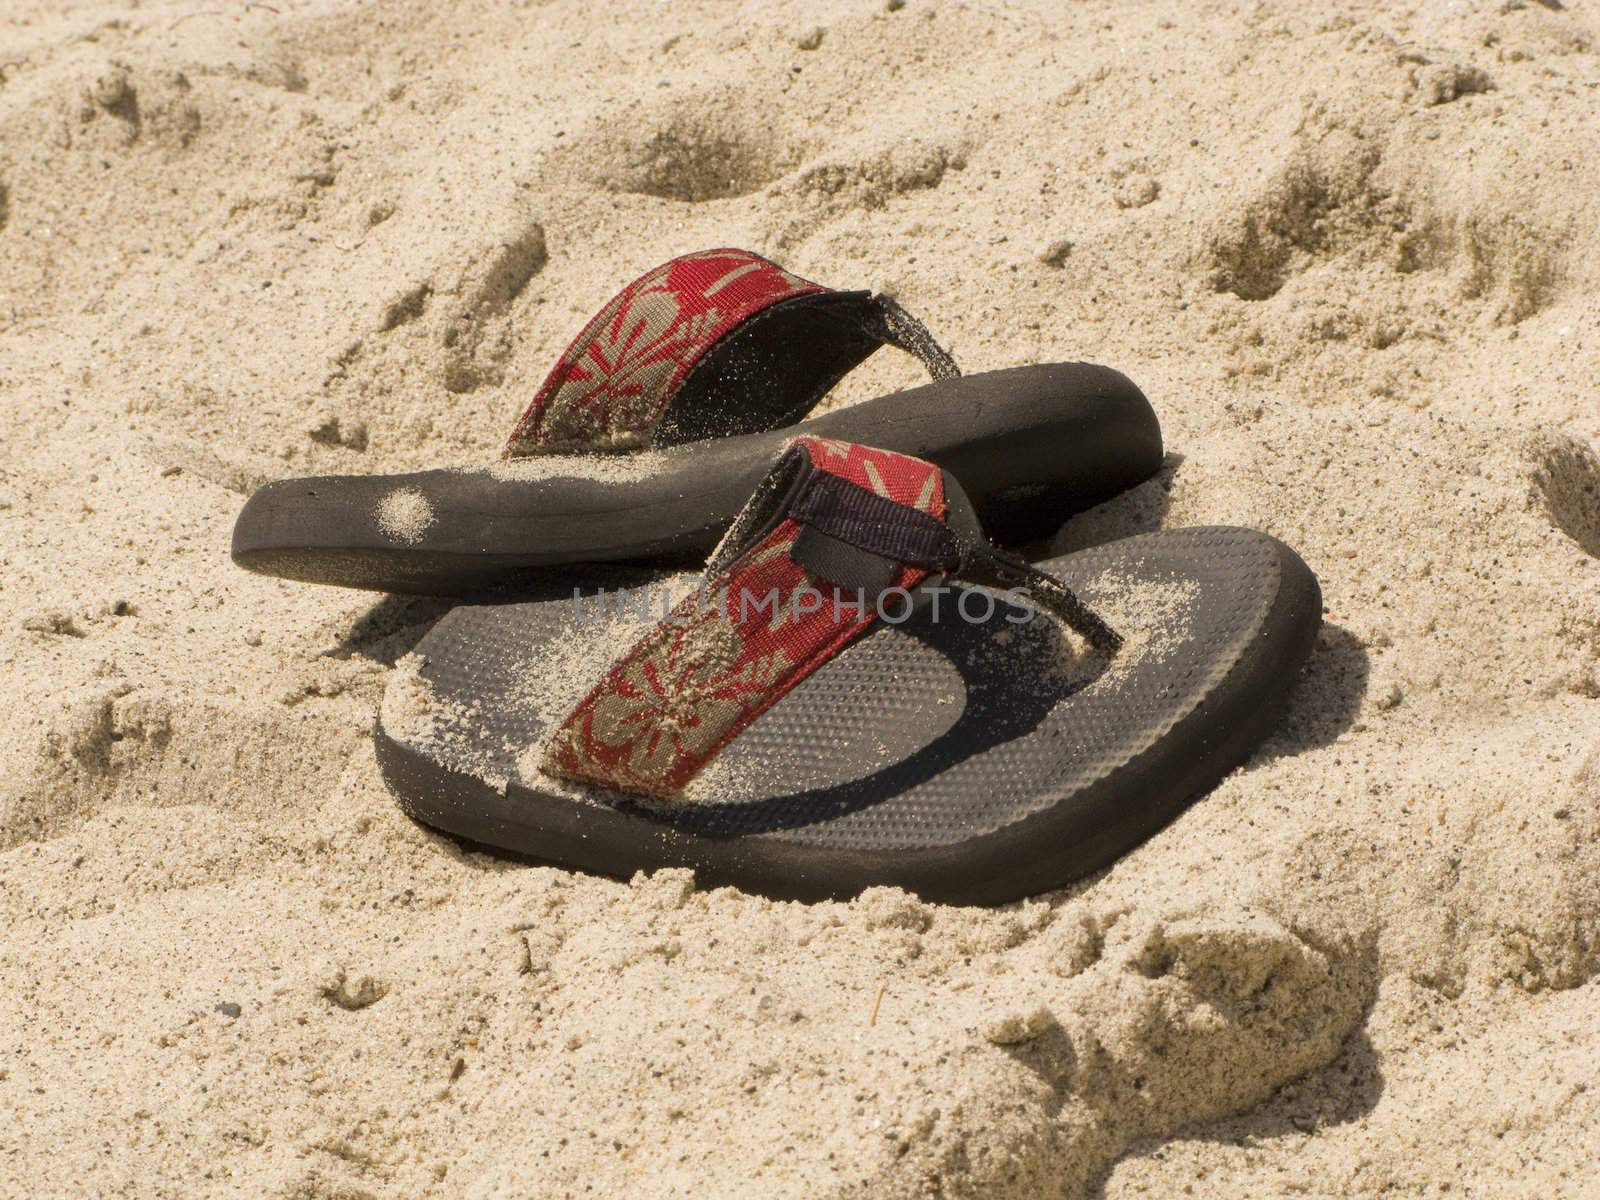 Sandals in the Sand on a San Clemente Beach